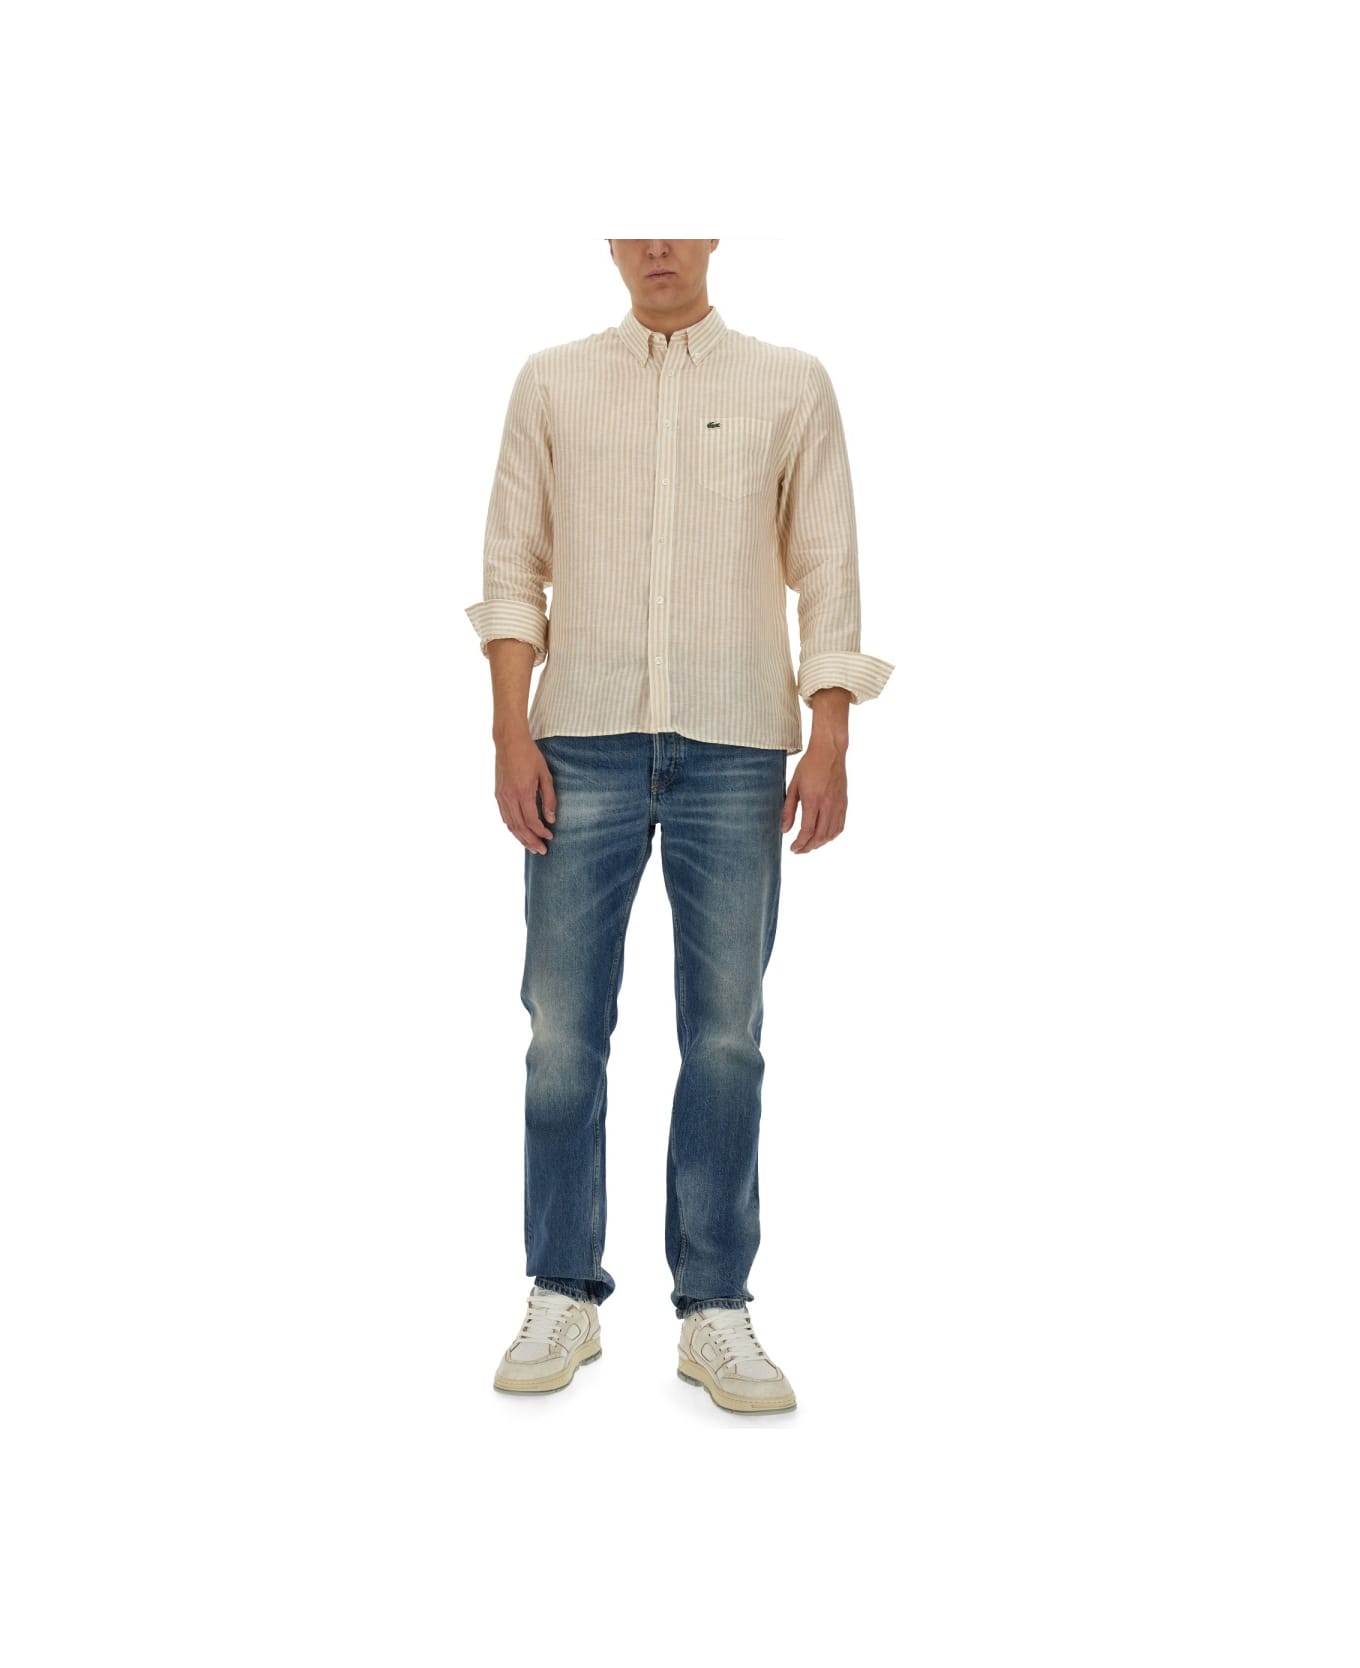 Lacoste Shirt With Logo - BEIGE シャツ